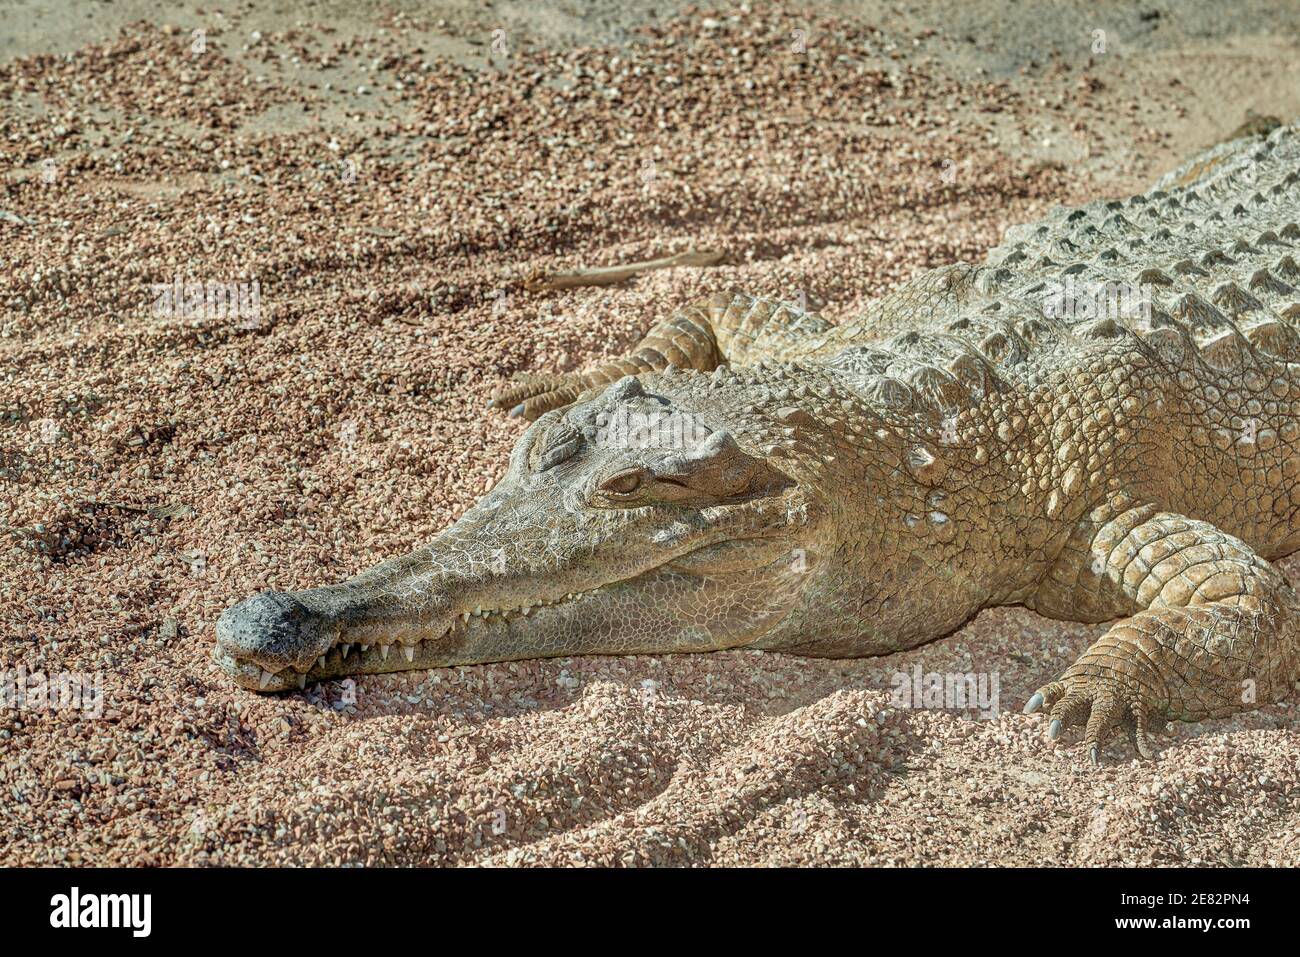 Crocodylidae is a family of sauropsids, archosaurs commonly known as crocodiles in the Oceanografico of the city of Valencia, Spain Stock Photo